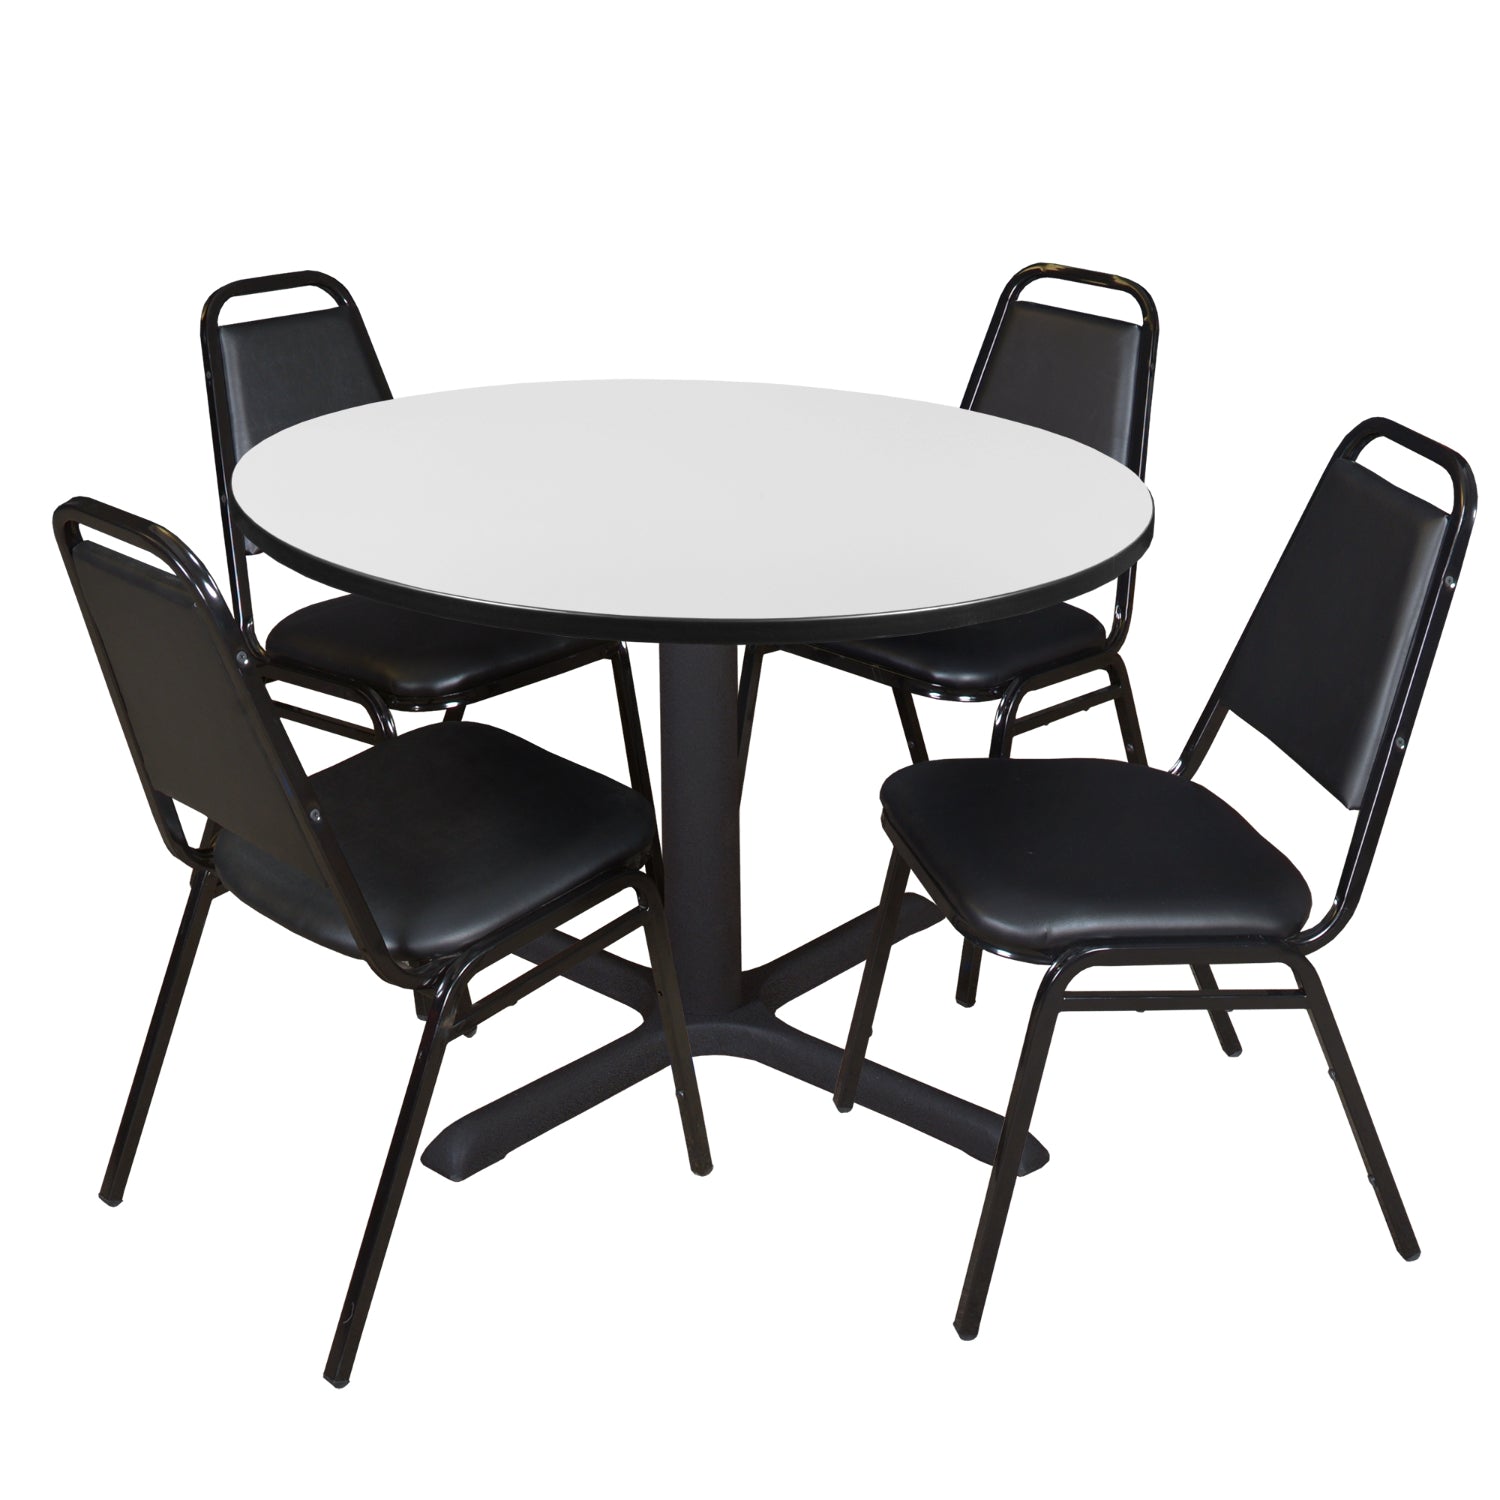 Cain Round Breakroom Table and Chair Package, Cain 48" Round X-Base Breakroom Table with 4 Restaurant Stack Chairs